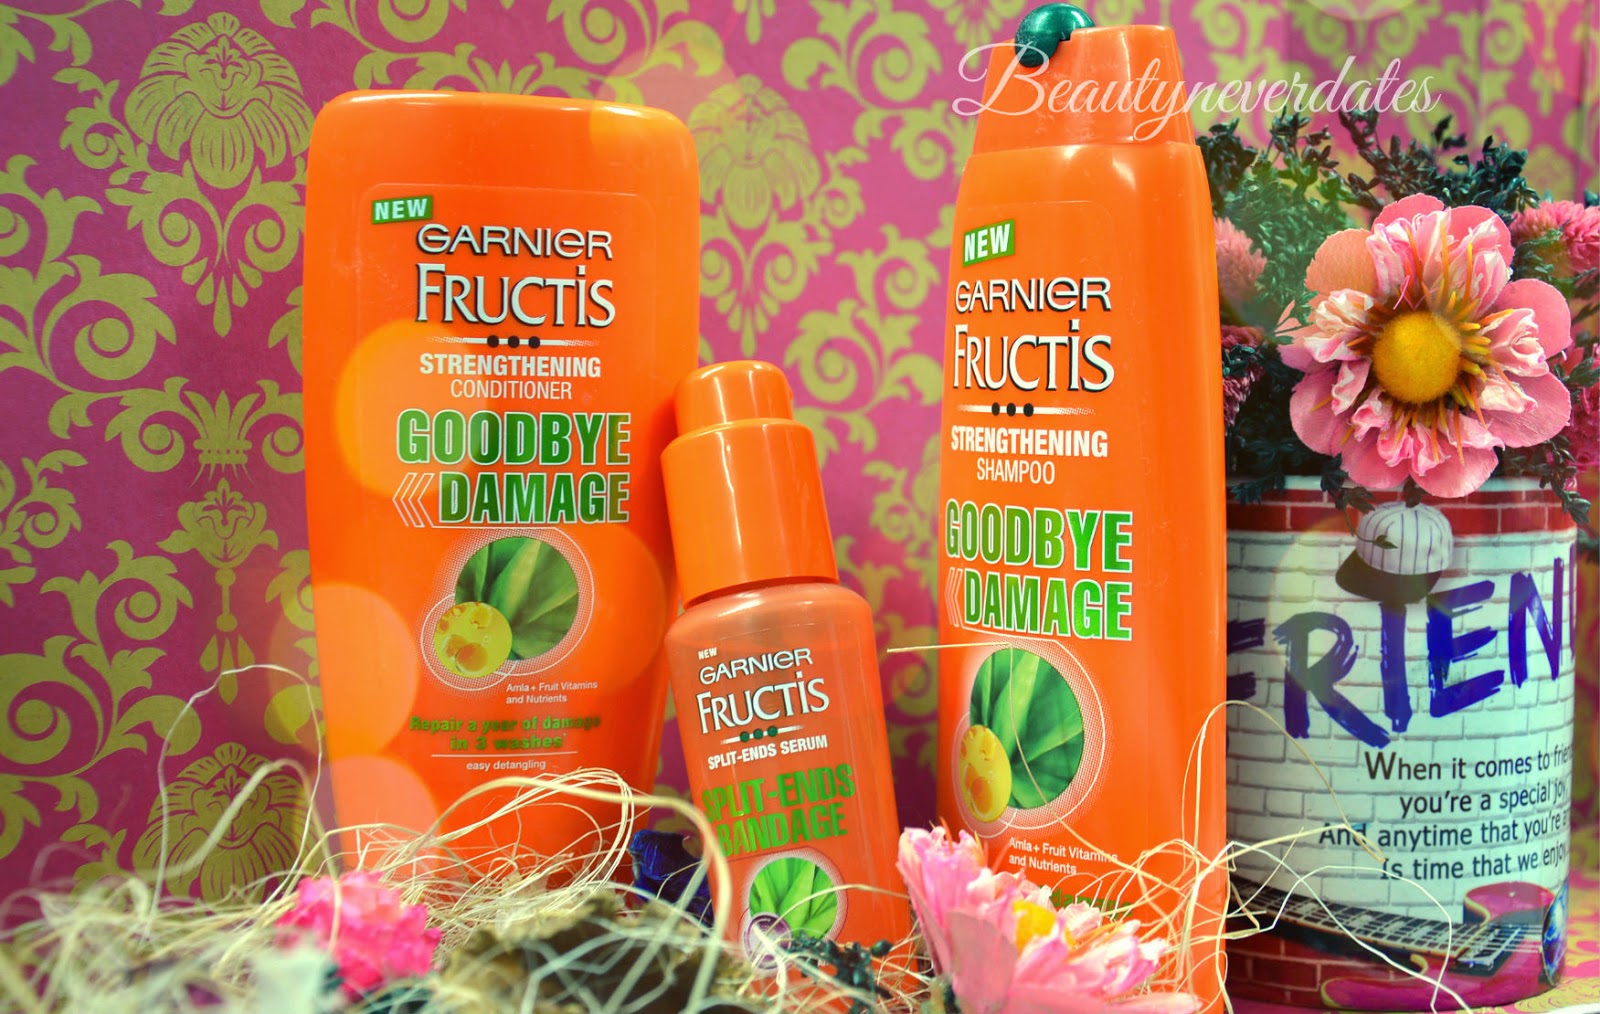 My Favorite Garnier Hair Products - Shampoo, Conditioner, Leave-in-conditioner and Styling Gel